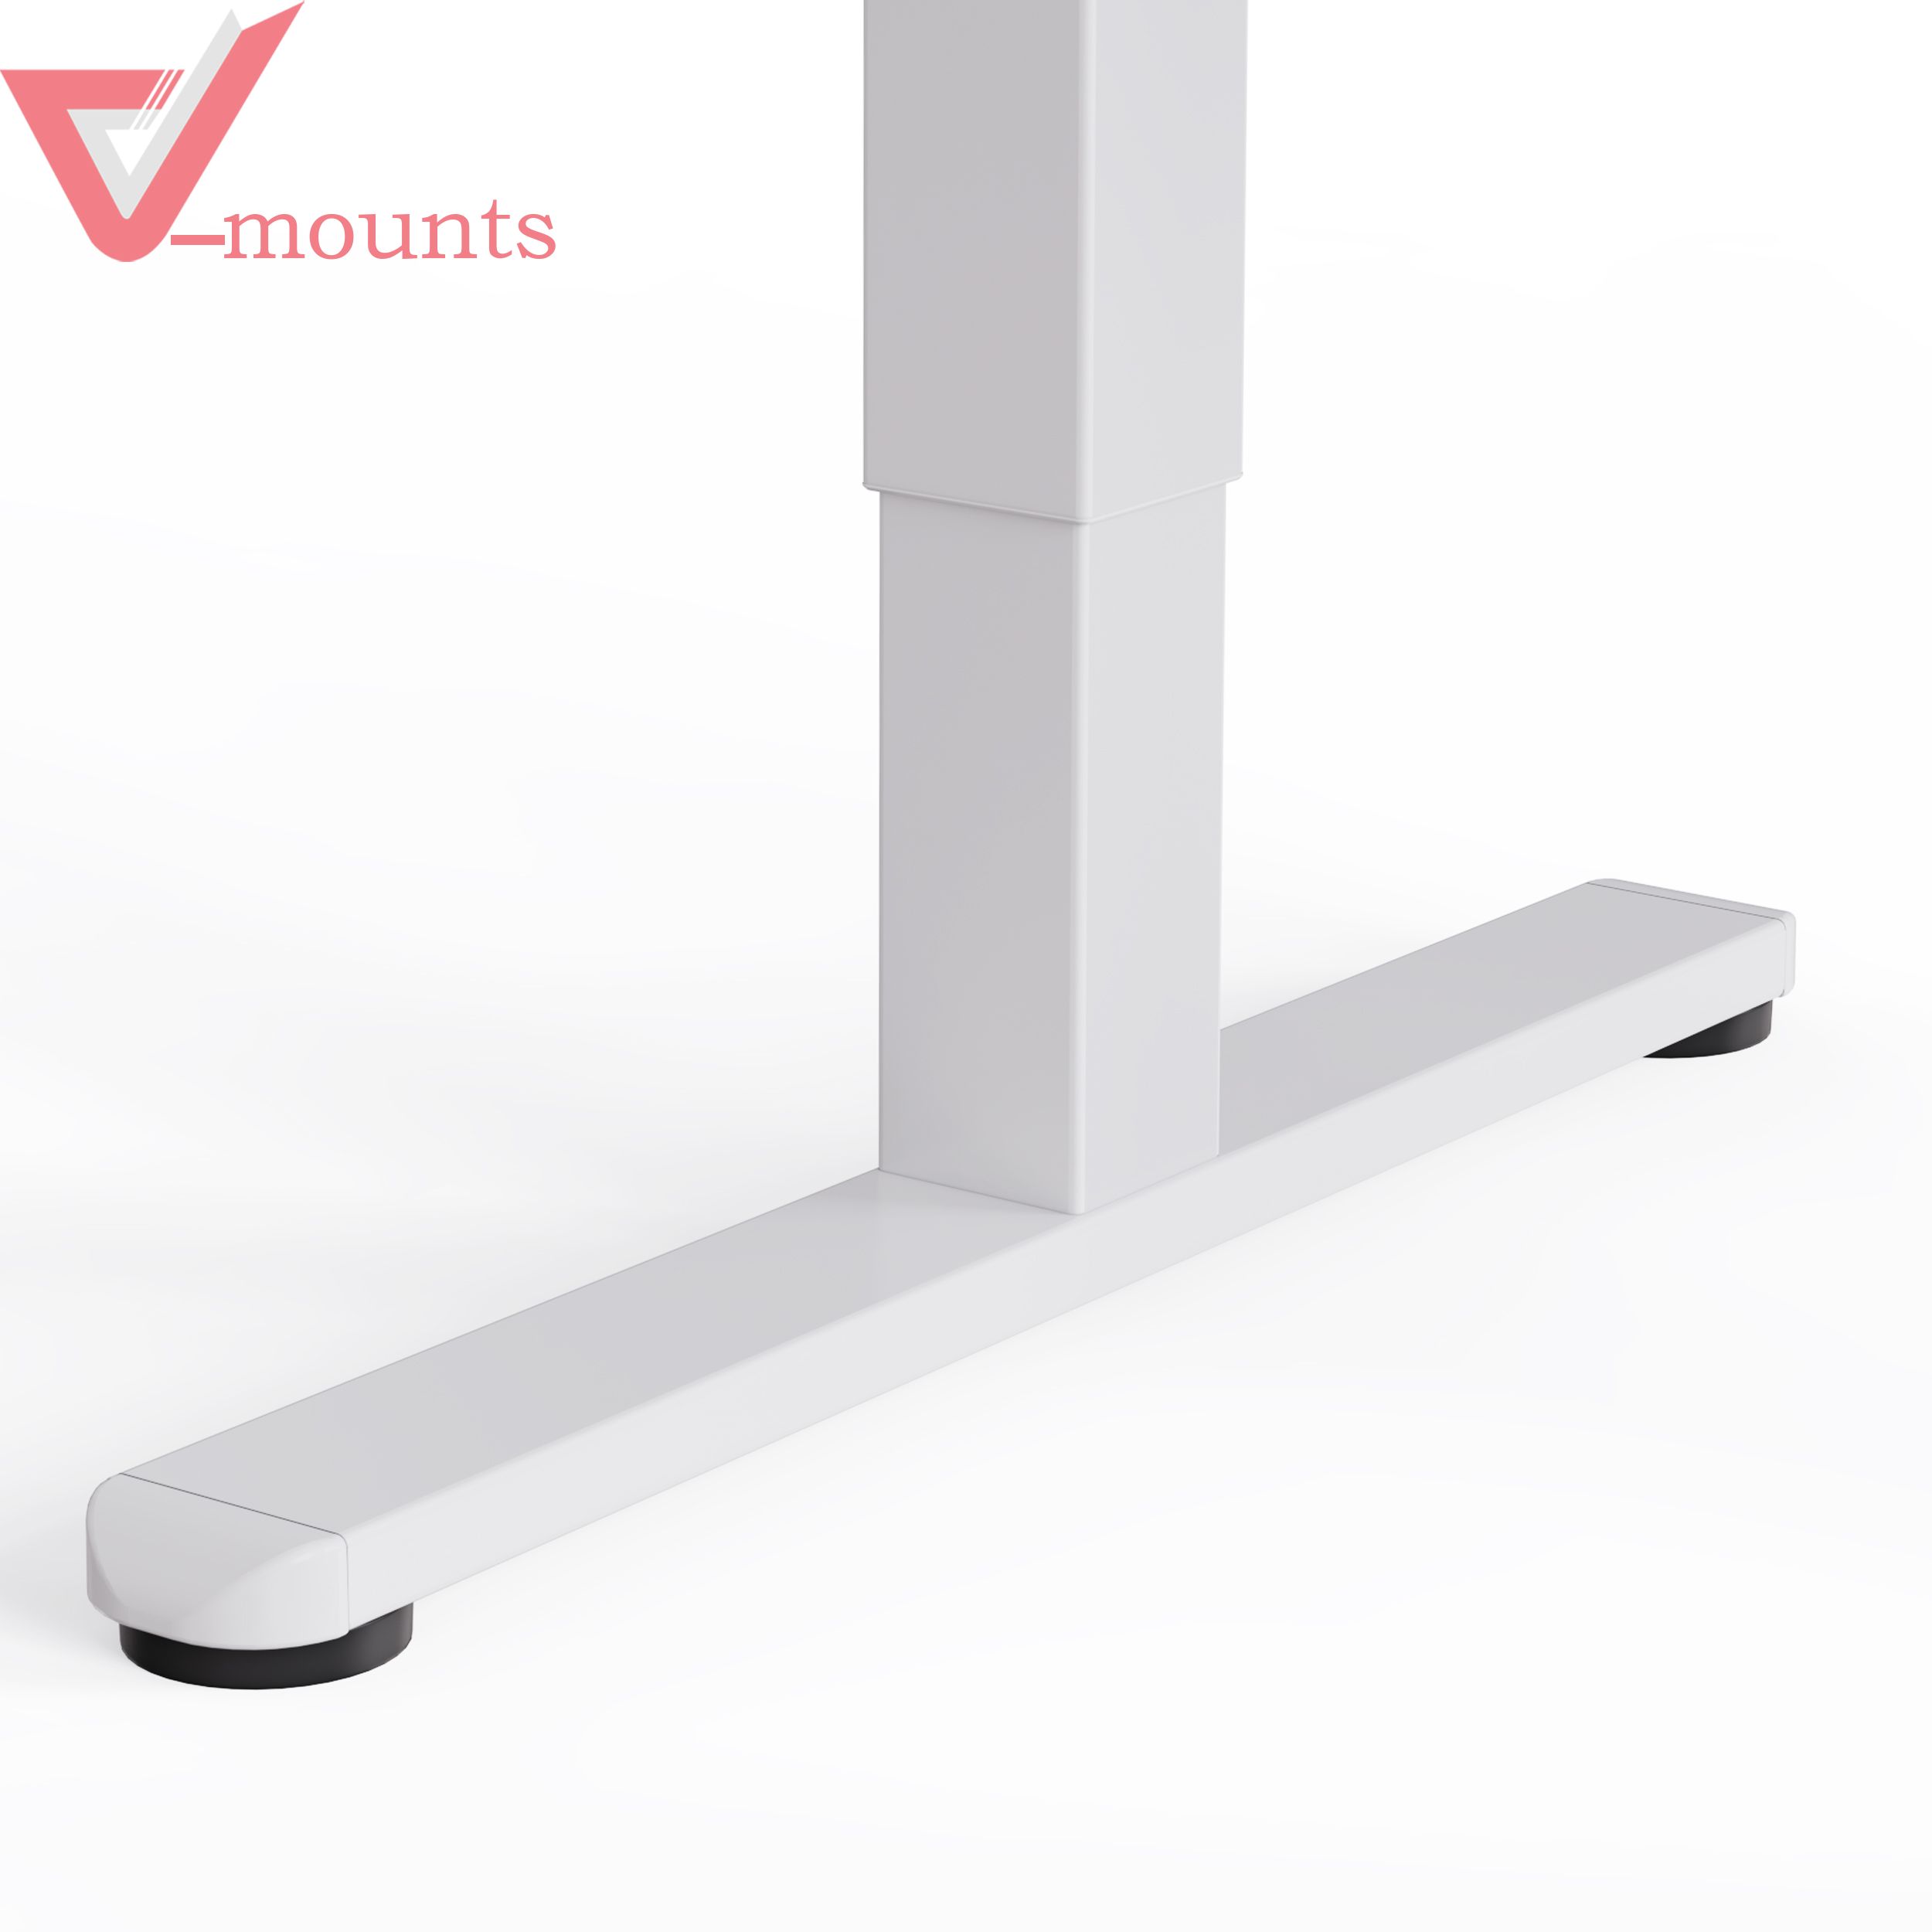 V-mounts Electric Dual Motor Height Adjustable Standing Desks With 2 Splicing Boards And Square Legs VM-JSD2-01-2P